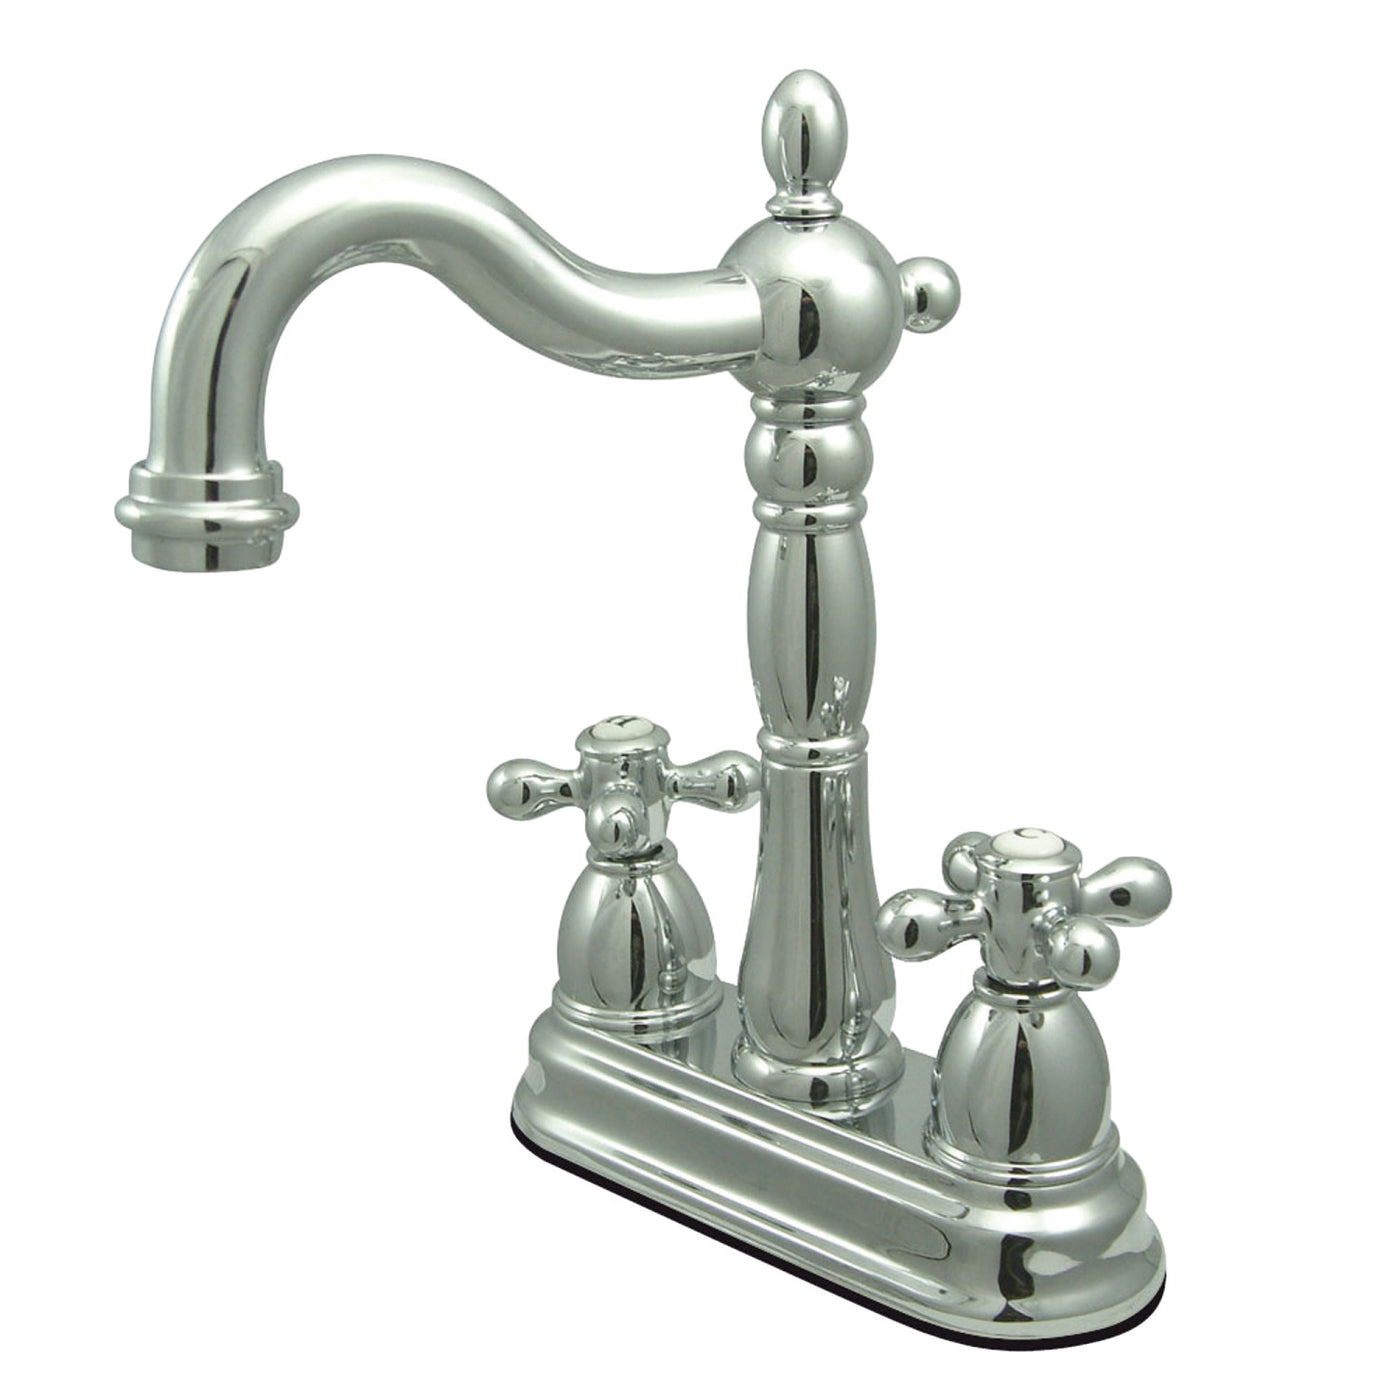 Elements of Design EB1491AX 4-Inch Centerset Bar Faucet, Polished Chrome